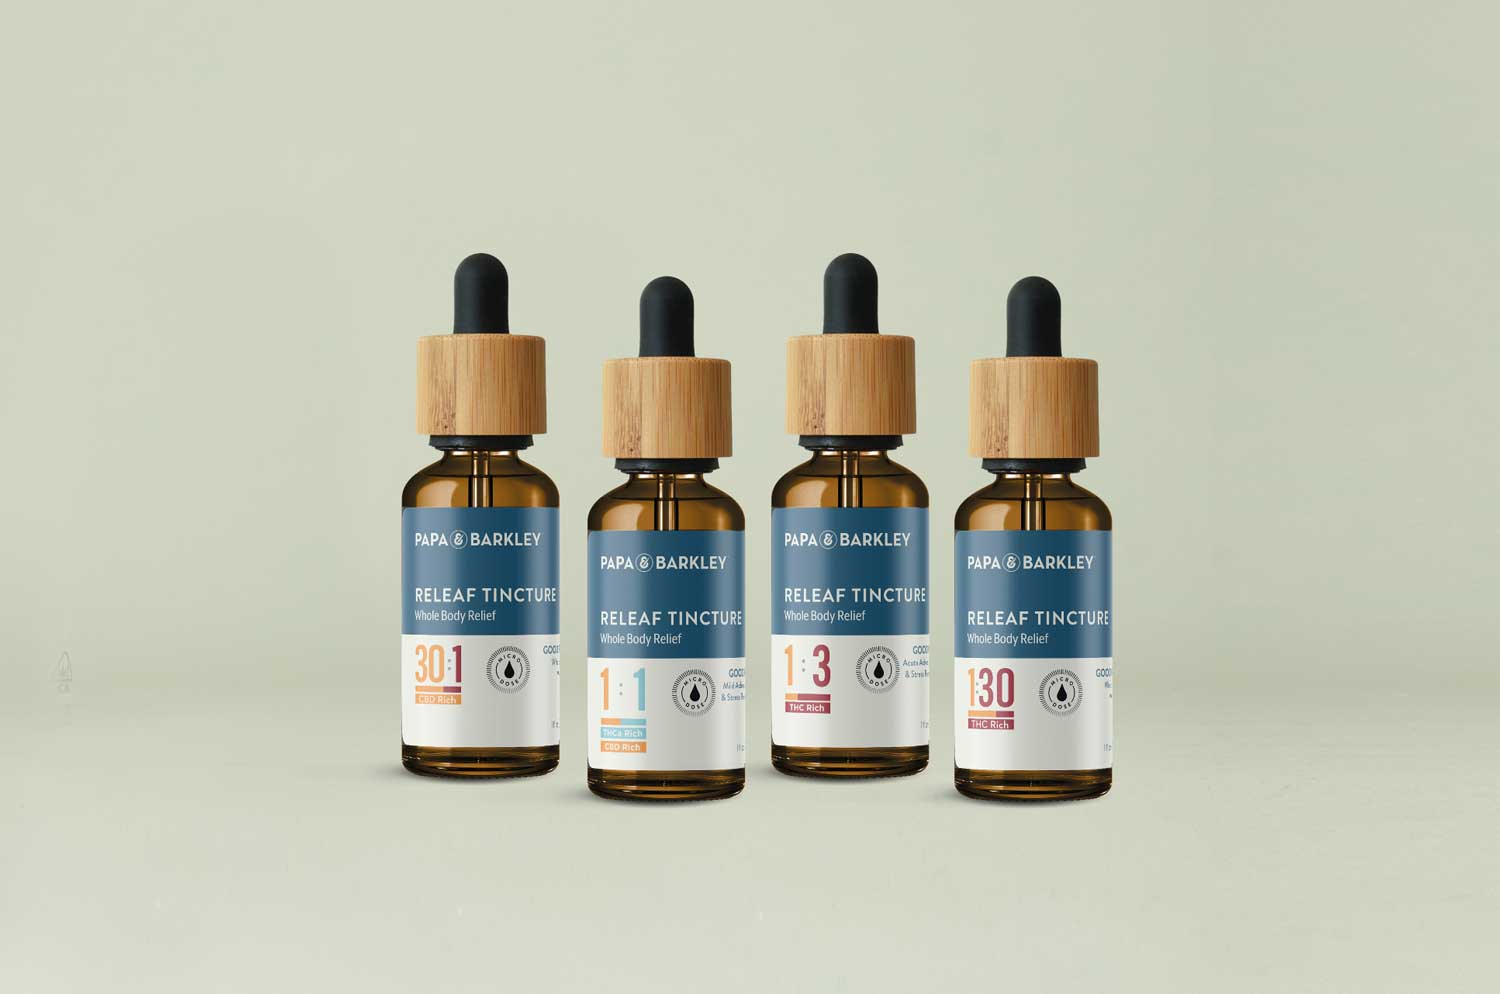 Find the right tincture for your needs